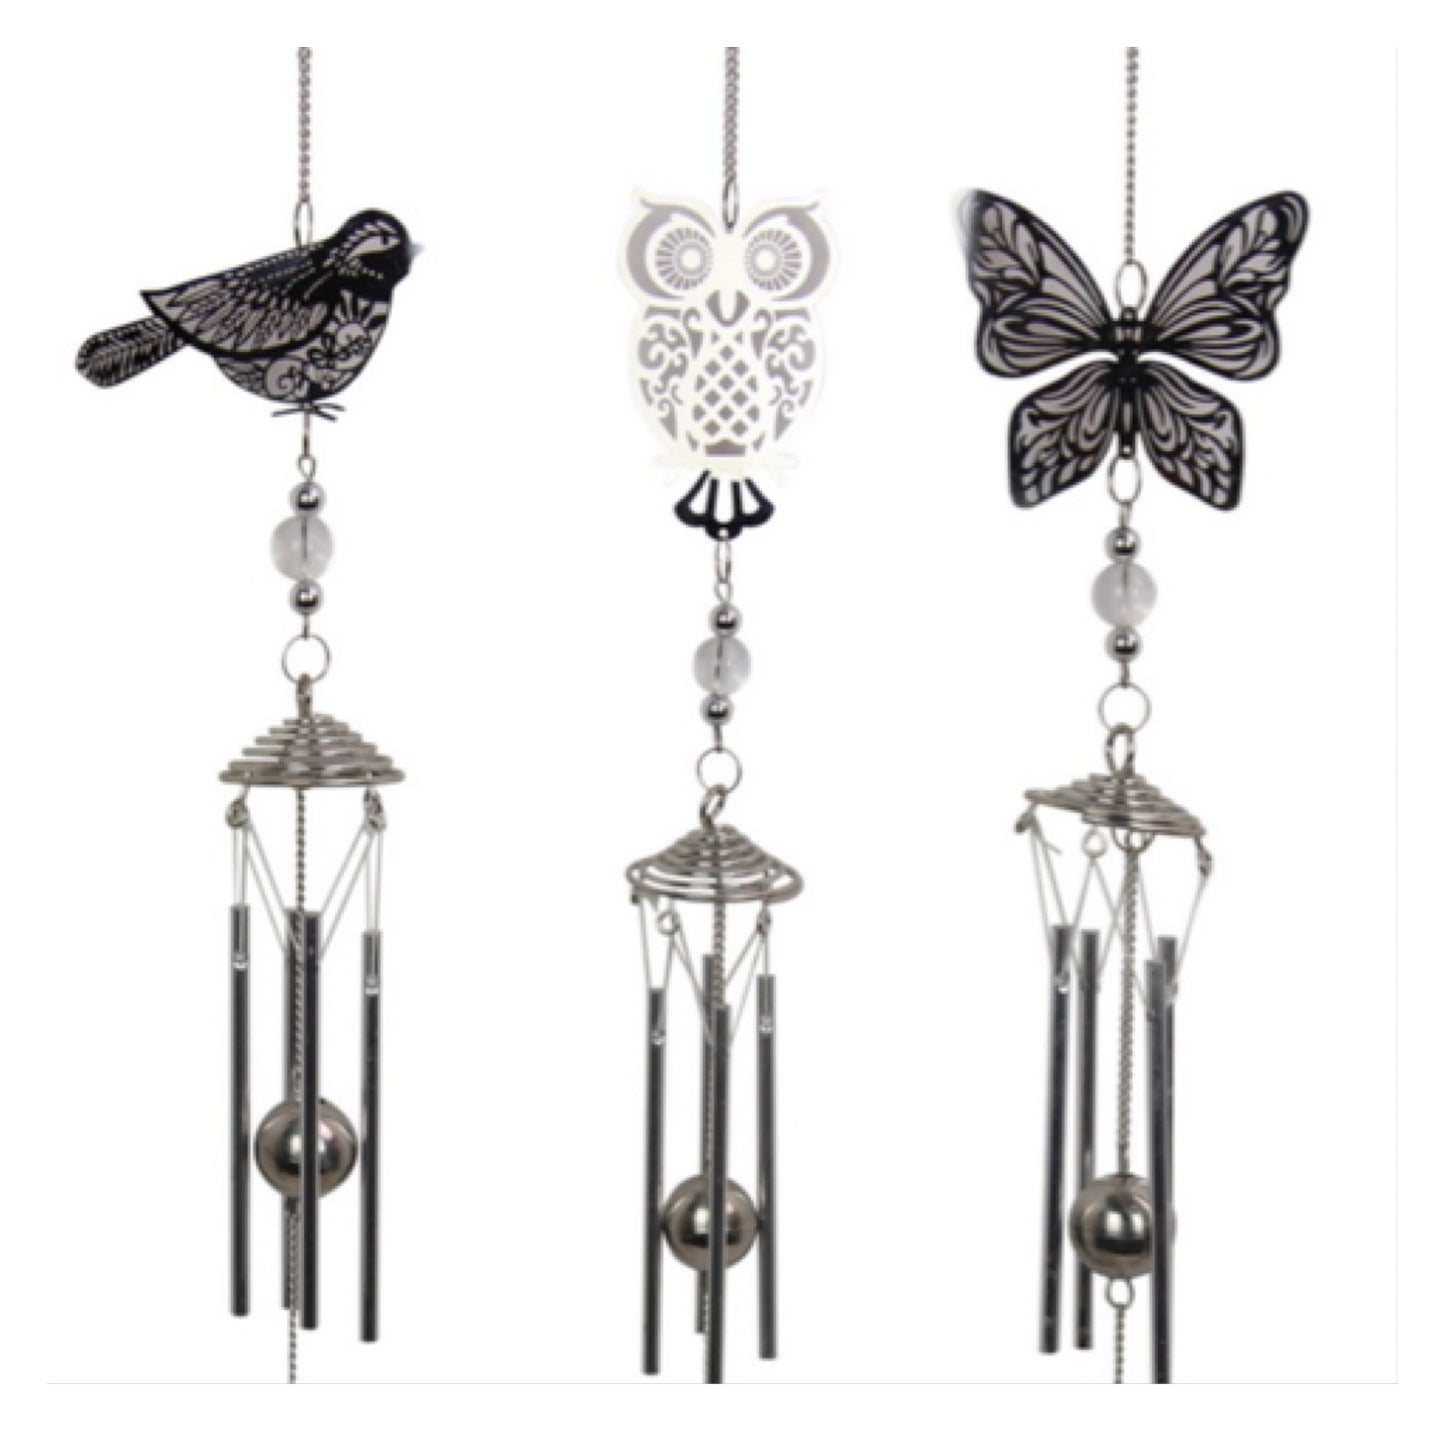 Butterfly Owl or Bird Wind Chime Hanging - The Renmy Store Homewares & Gifts 